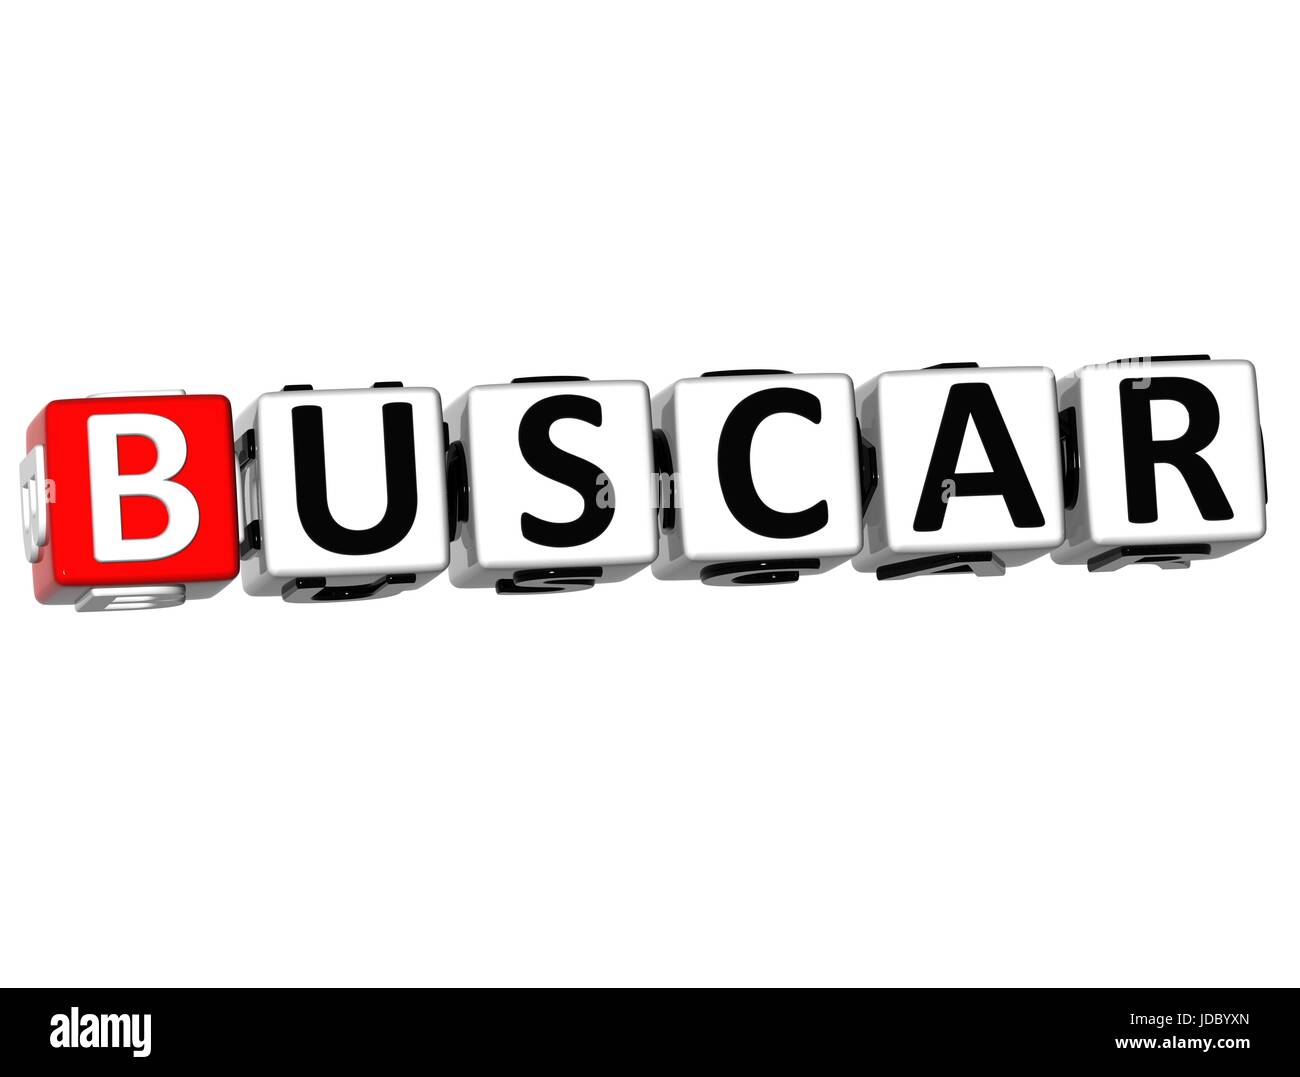 3D Buscar Block Text on white background Stock Photo